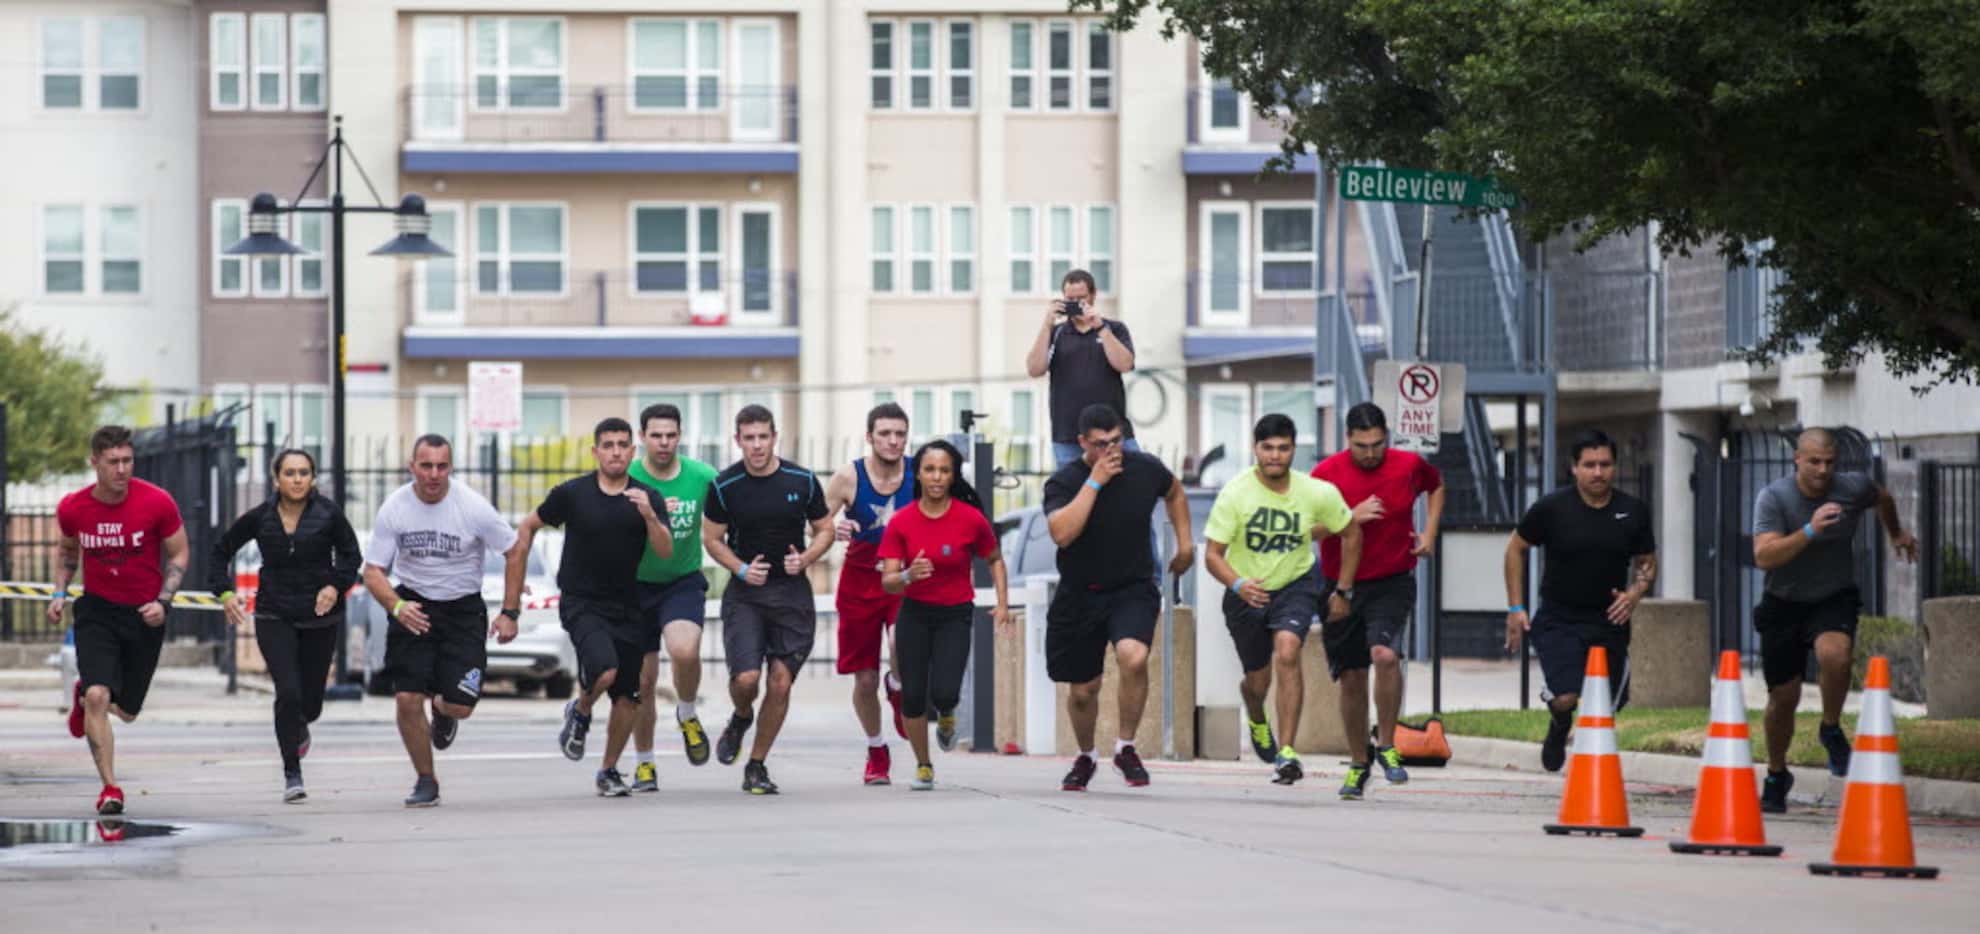 Dallas police officer applicants run a 300-meter time trial while undergoing physical tests...